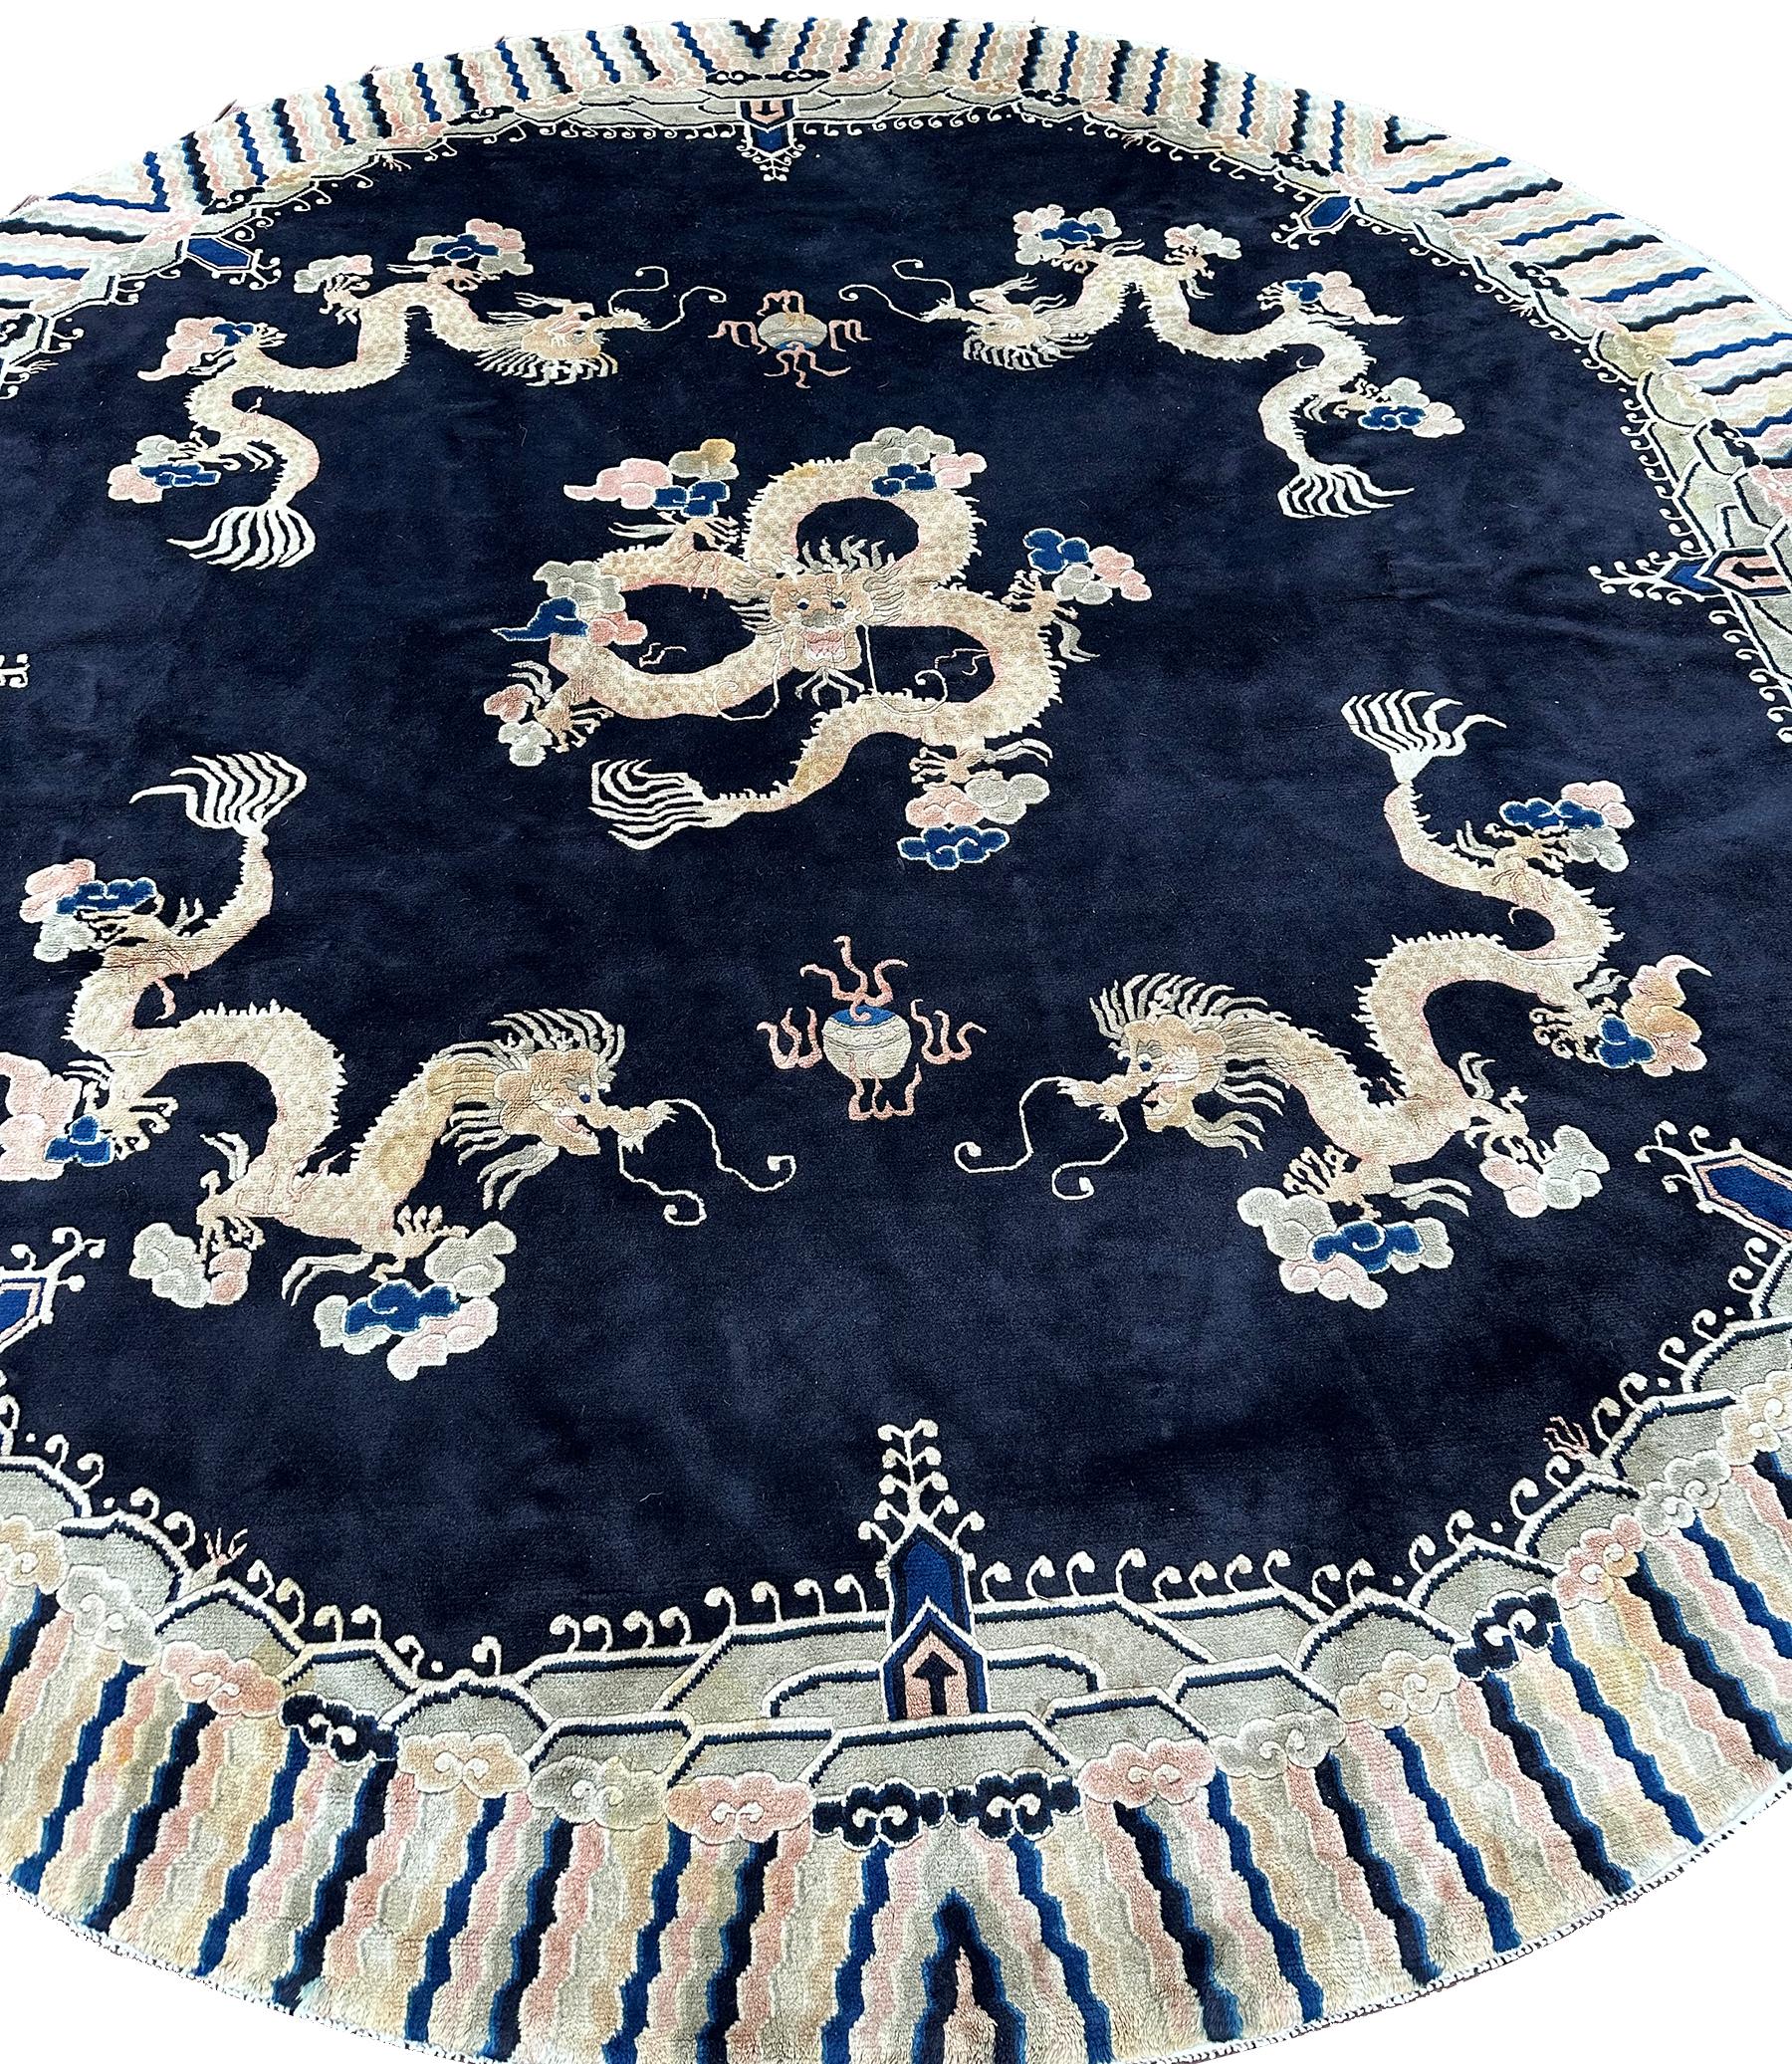 Antique Peking Art Deco Rug Chinese Rug Dragons 8x8ft Round 244cm x 244cm For Sale 3